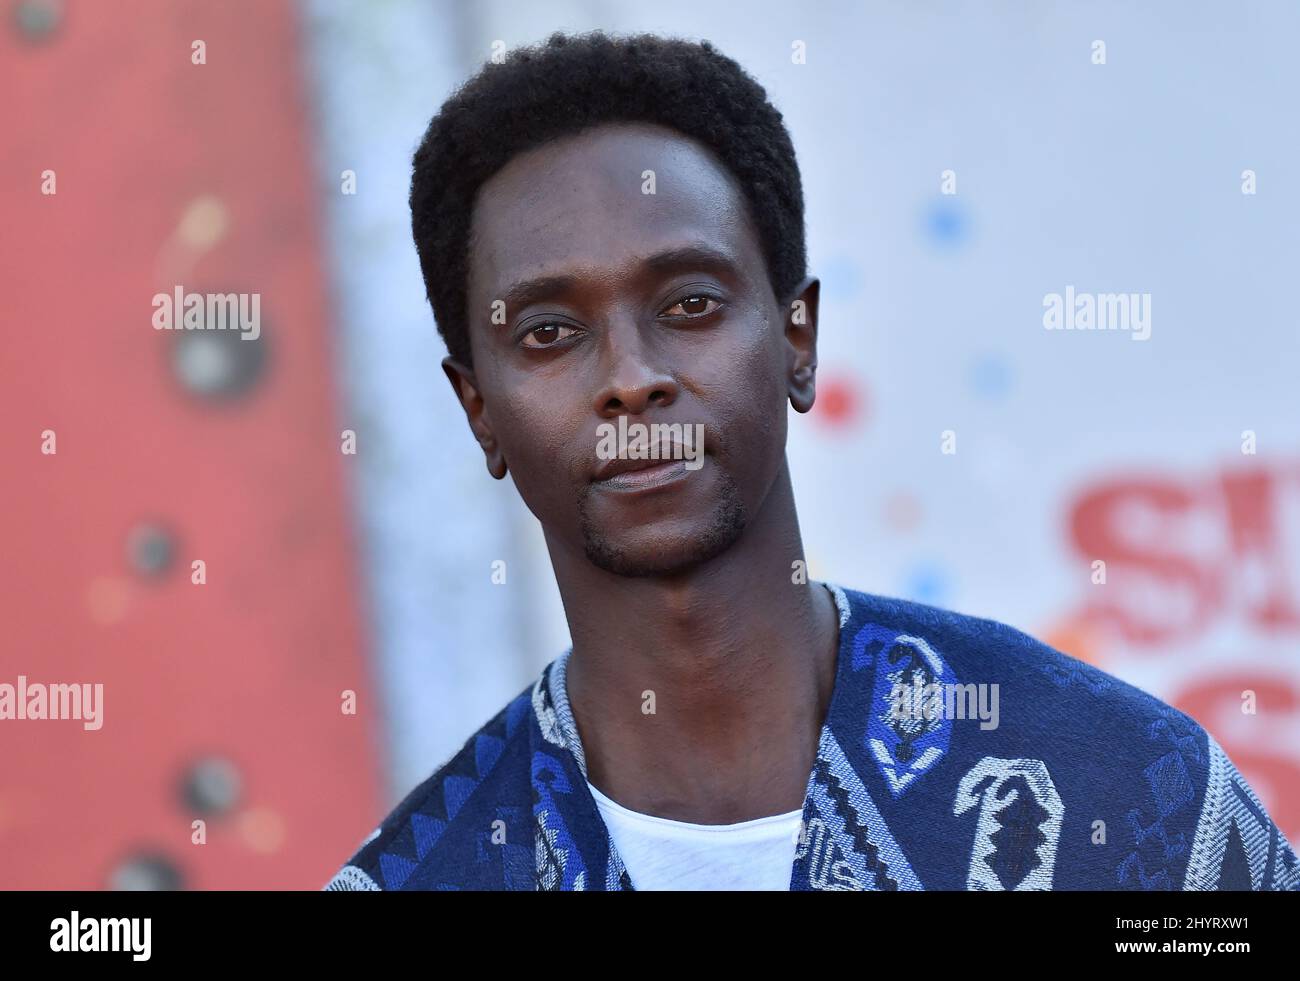 Edi Gathegi at 'The Suicide Squad' premiere held at the Regency Village Theatre on August 2, 2021 in Westwood, CA. Stock Photo